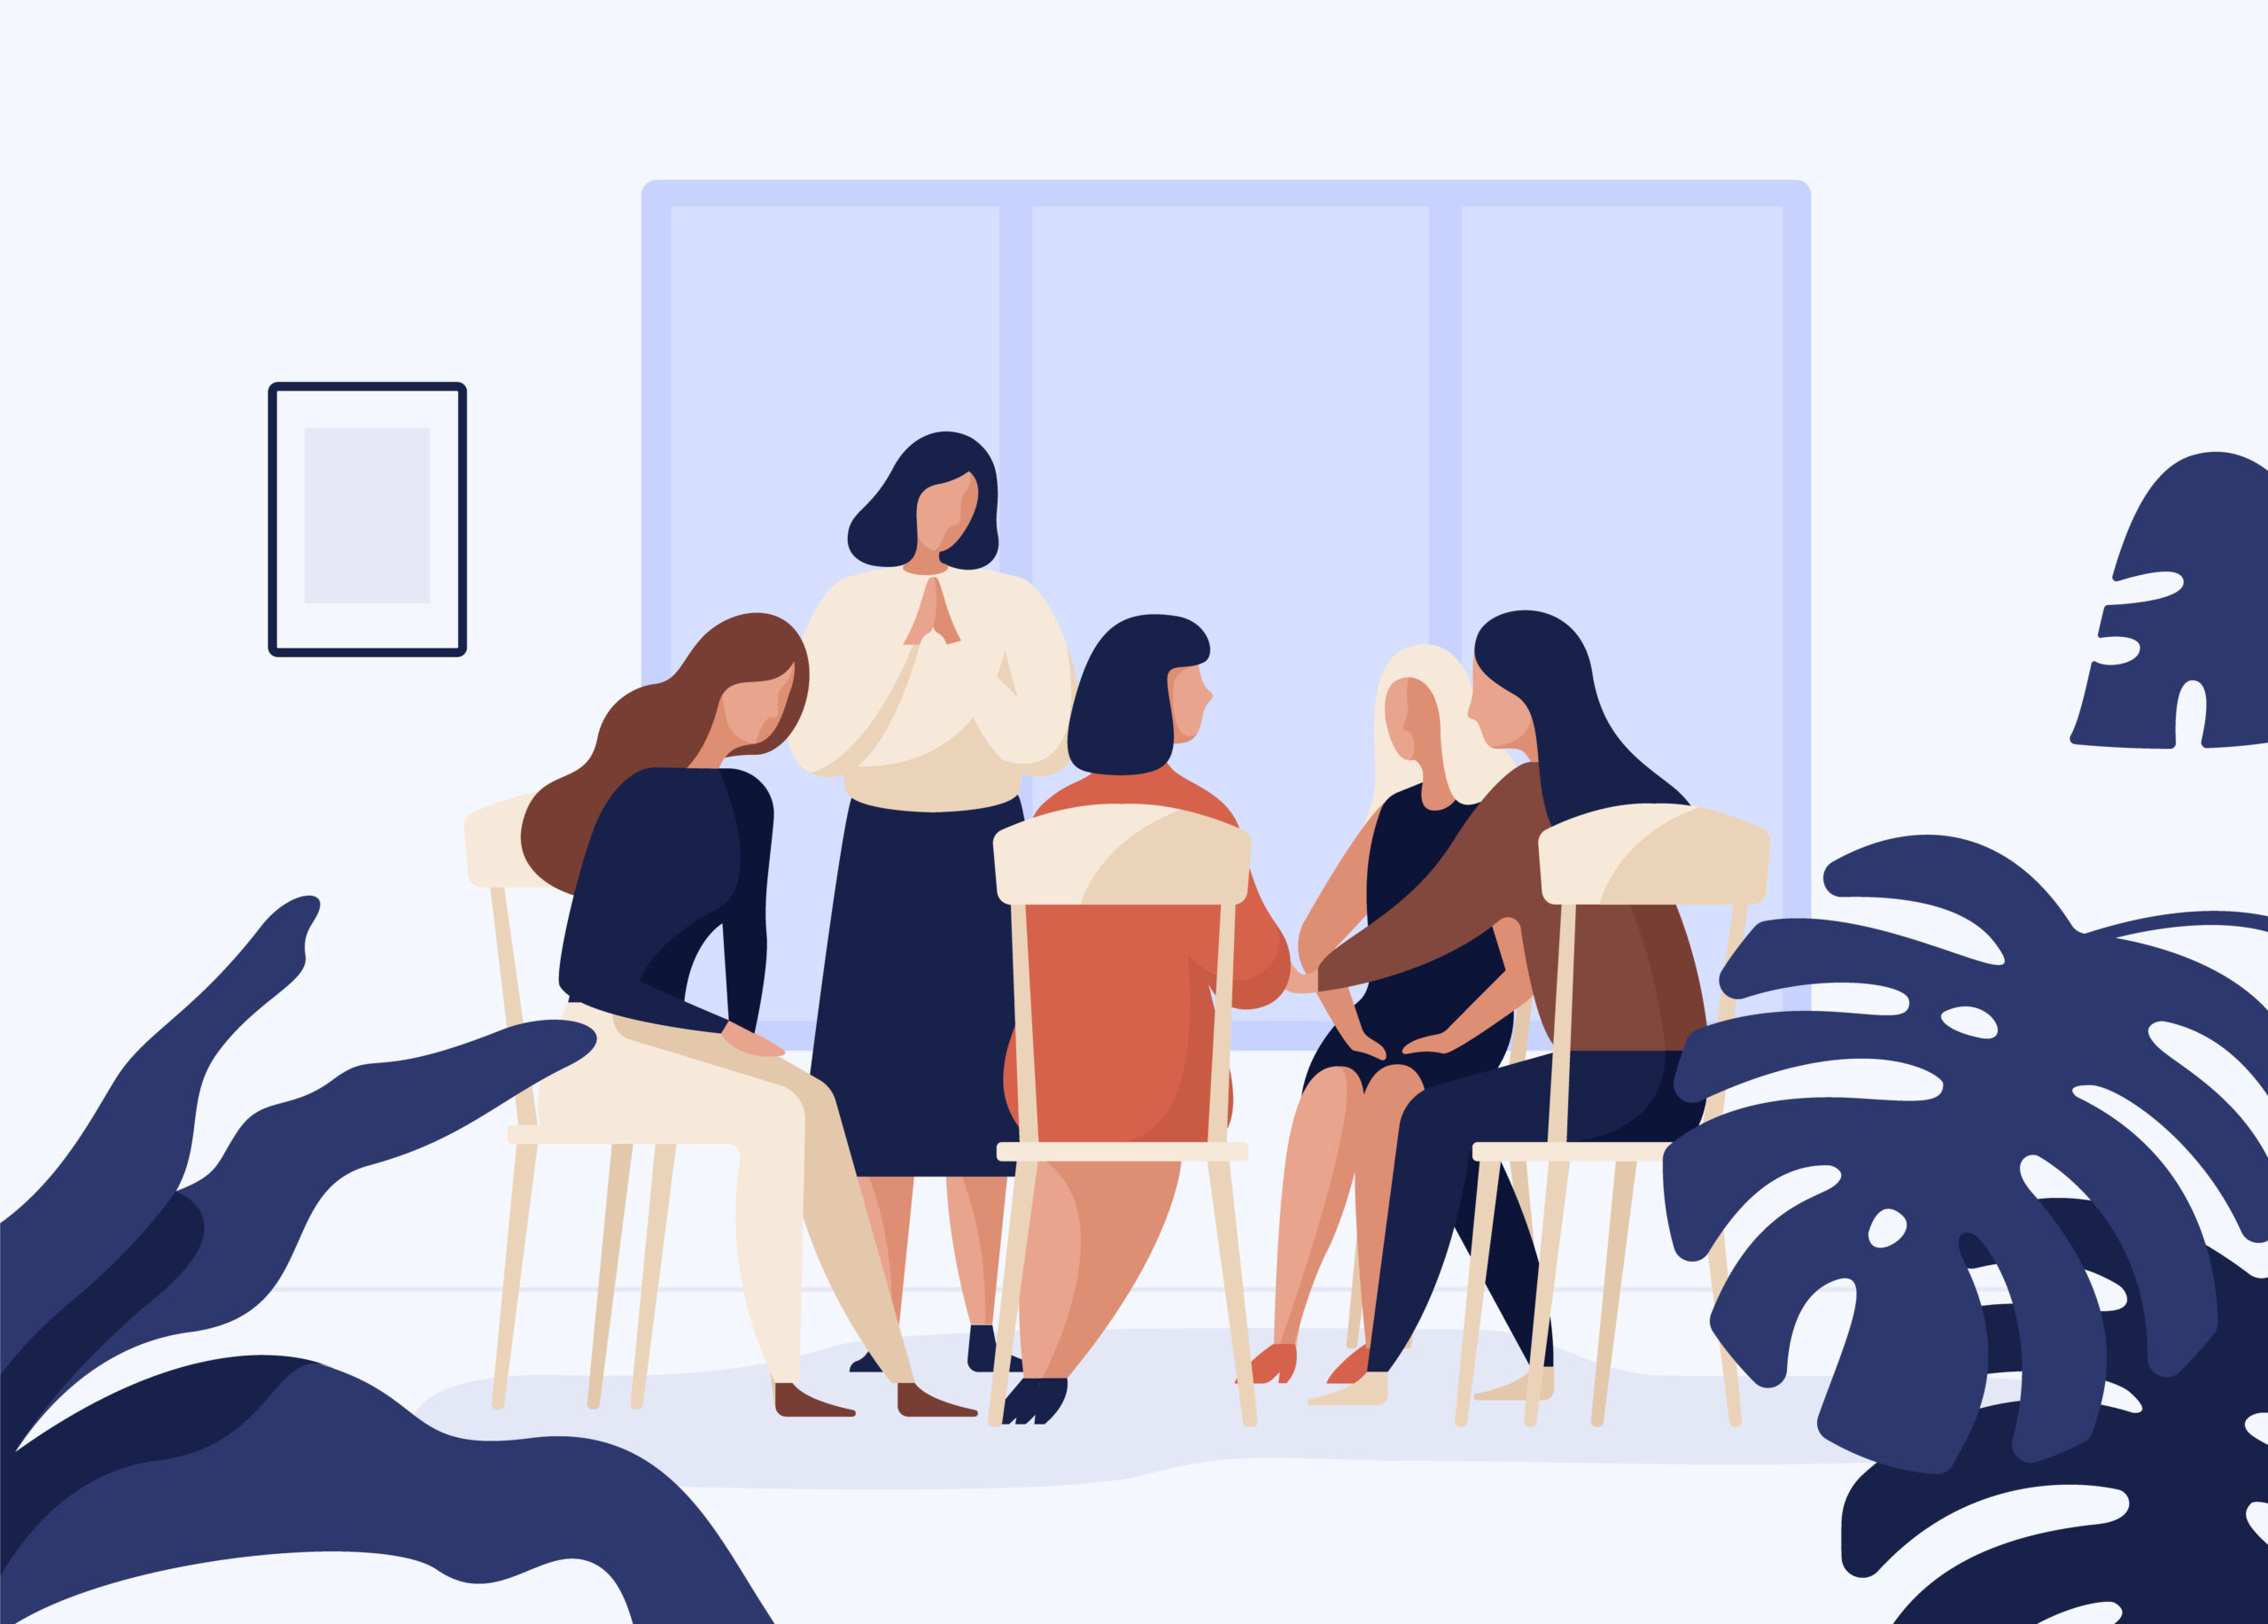 Female,Characters,Sitting,On,Chairs,In,Circle,And,Talking,To